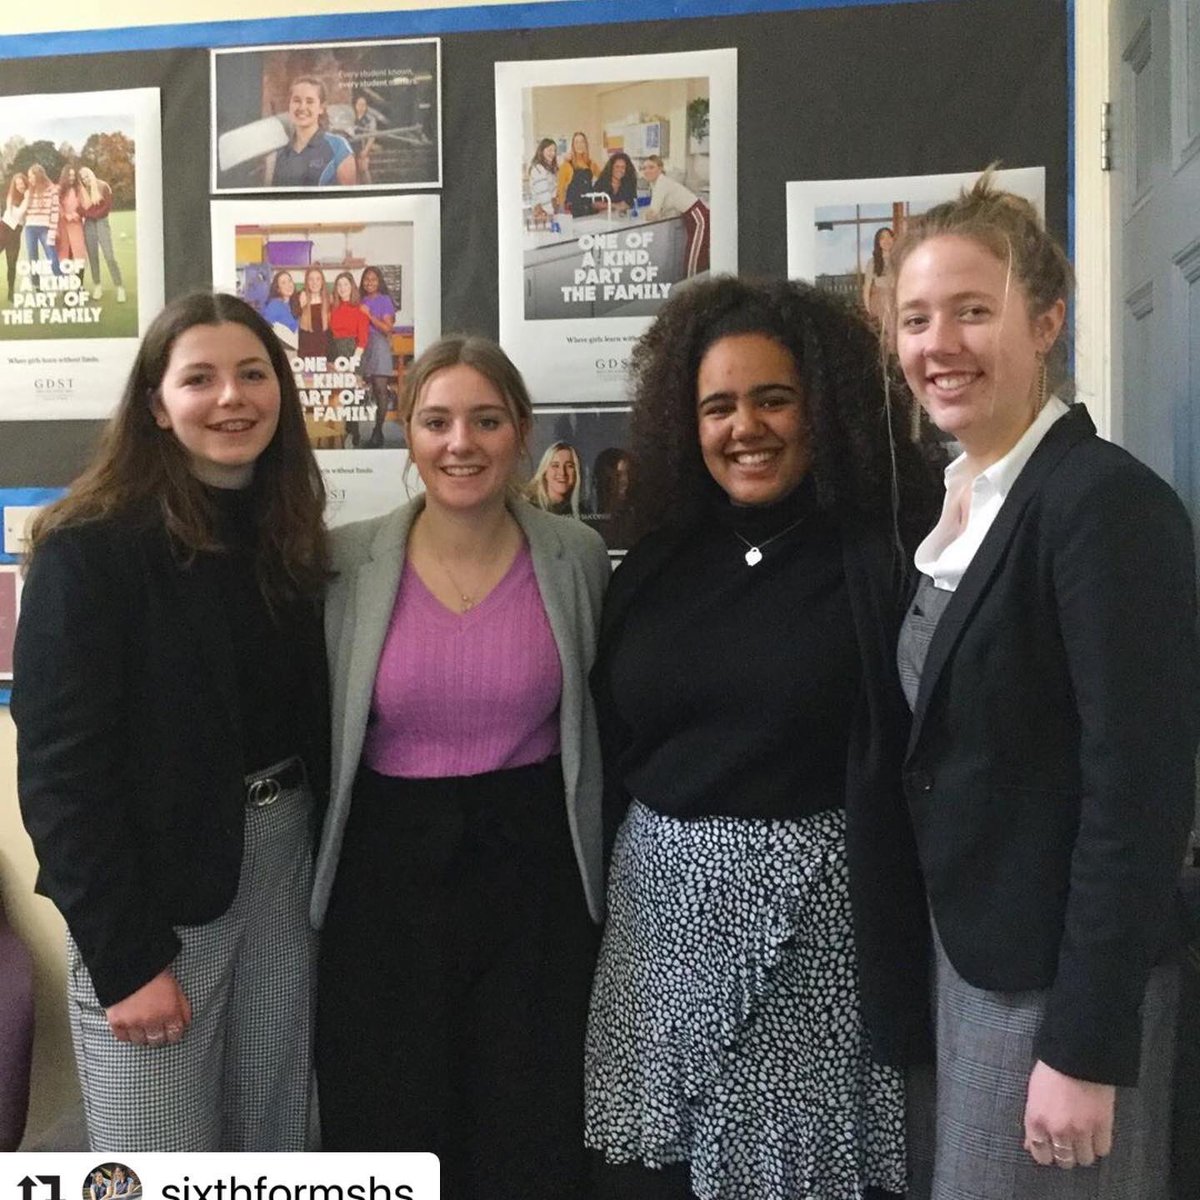 You can’t miss them! Great to get our fantastic #SixthForm girls in front of their @GDST #gdstsixthform campaign advert alongside fellow #gdst #sixthformers and wonderful to have @cherylGDST with us at SHS today #wheregirlslearnwithoutlimits #oneofakindpartofthefamily #shrewsbury